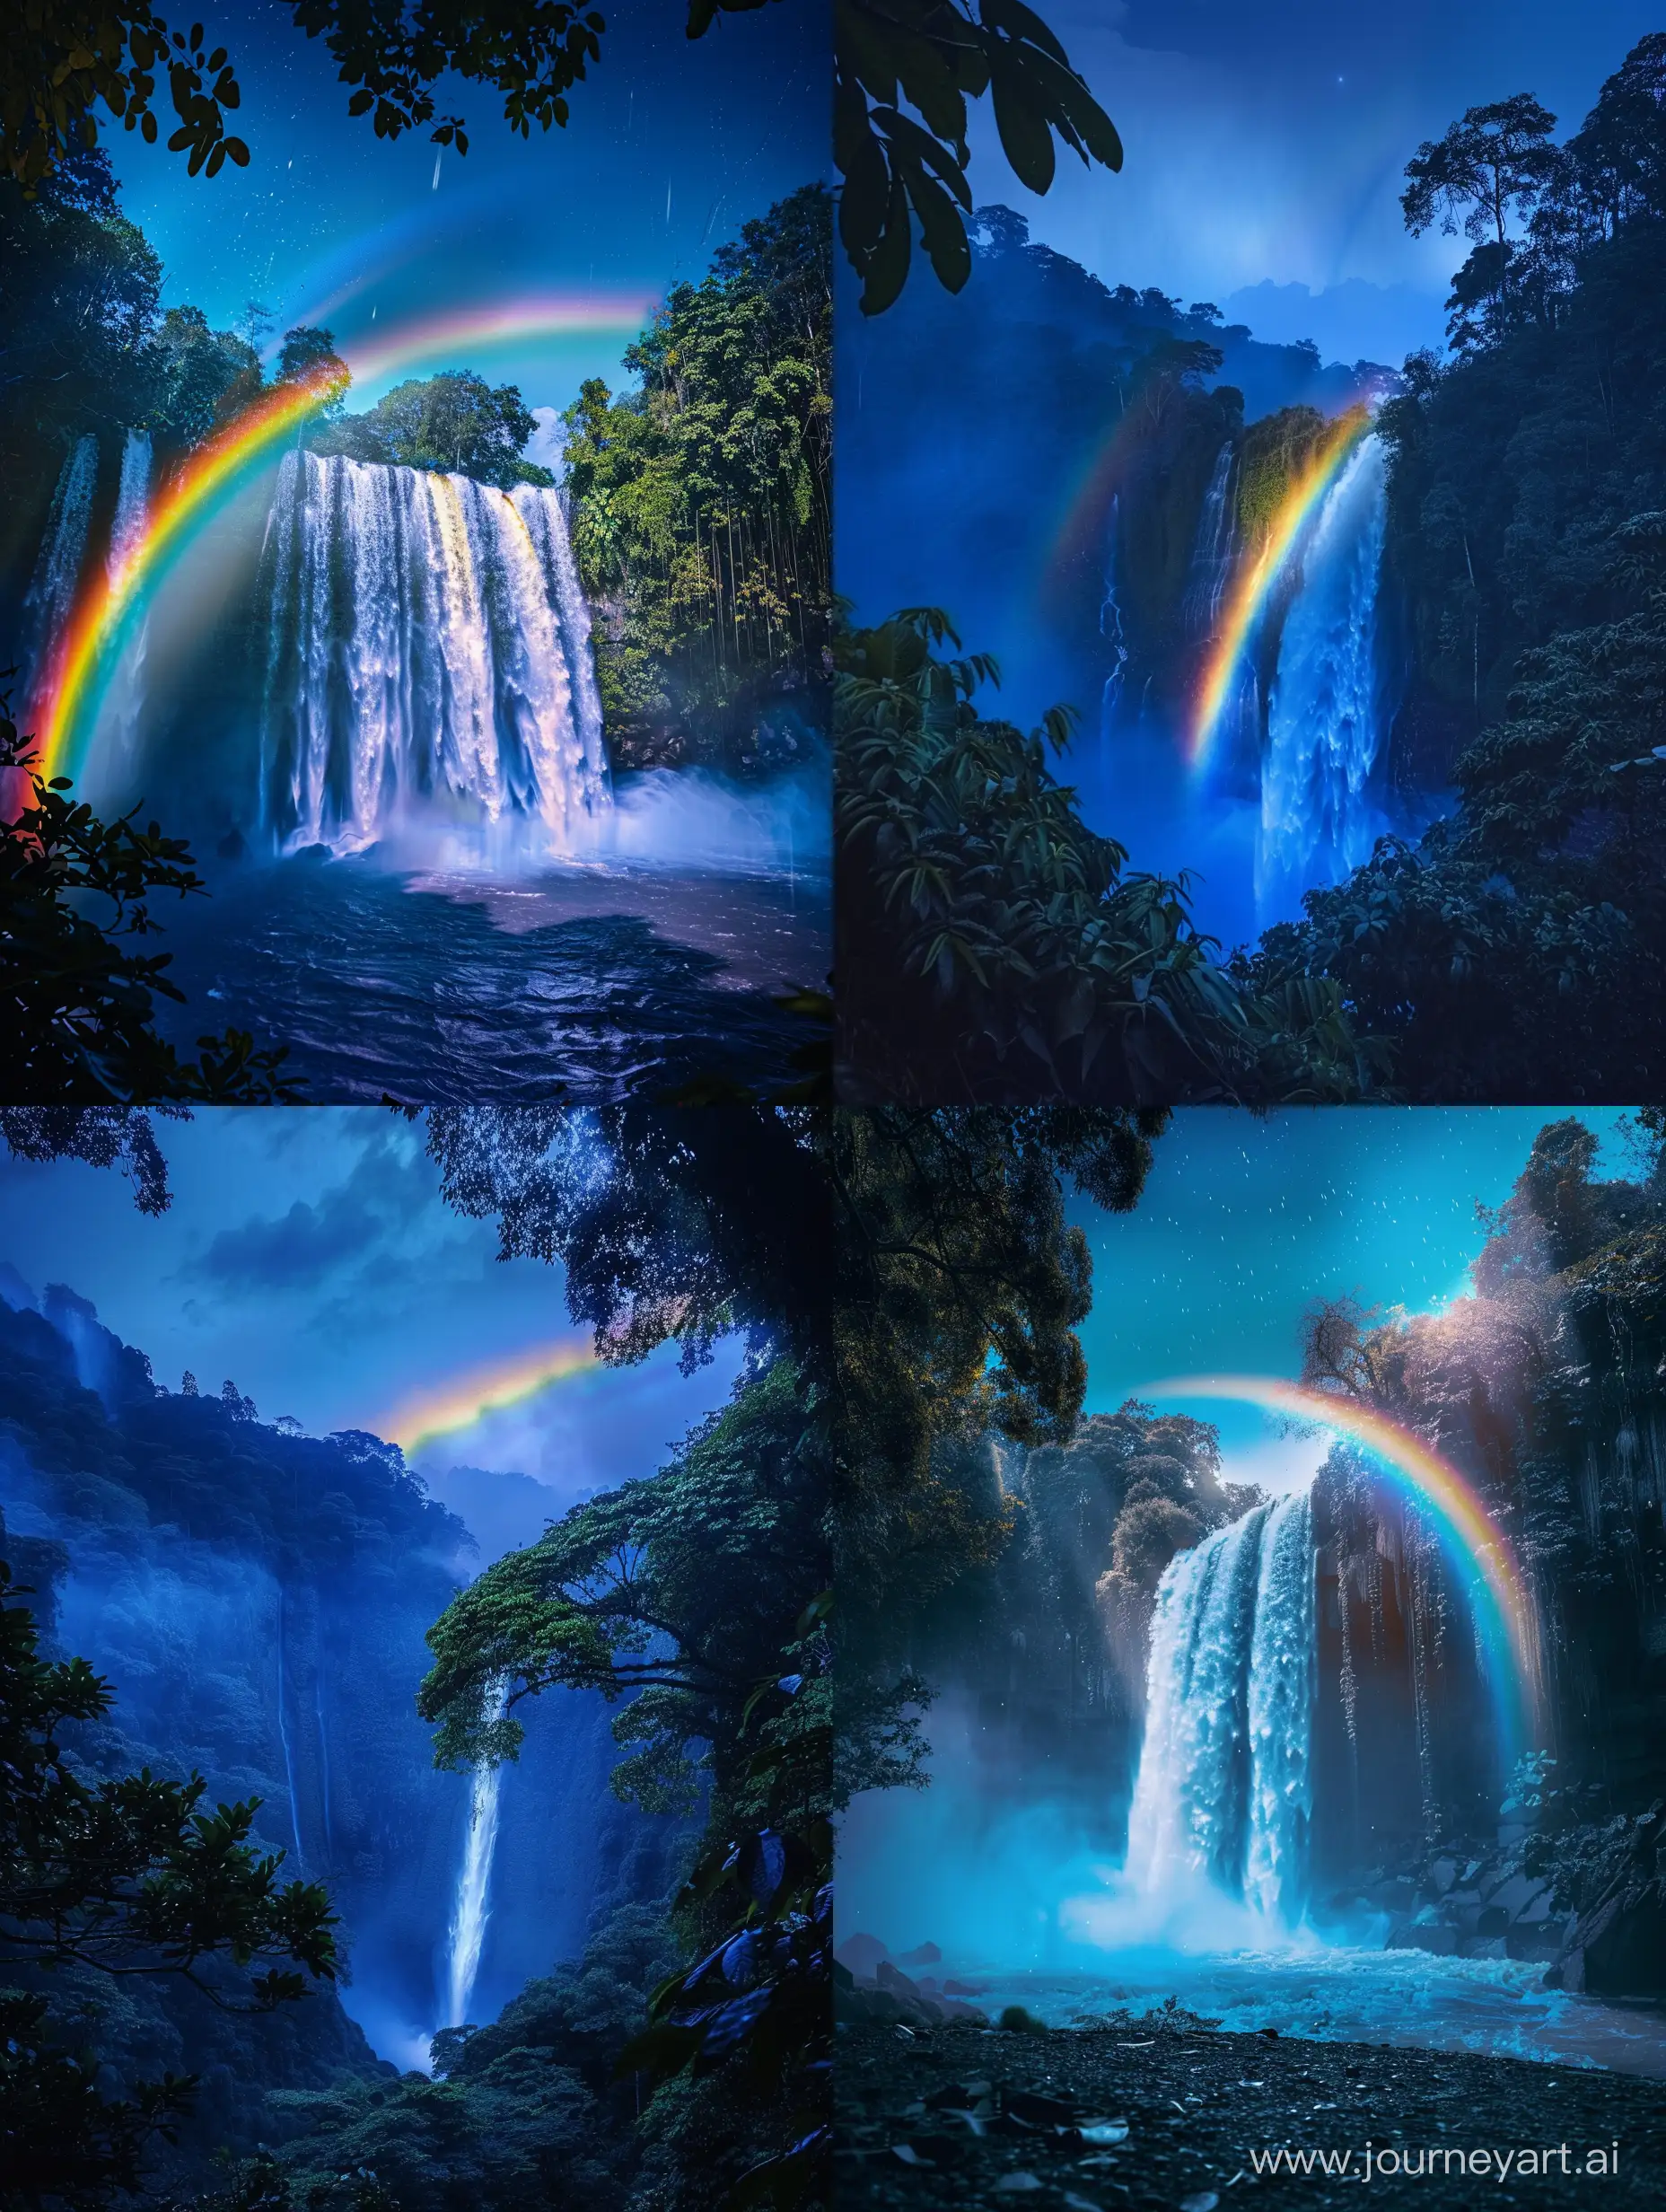 Enchanting-Night-Scene-Magical-Rainbow-Illuminates-Forest-and-Waterfall-in-Cinematic-Photography